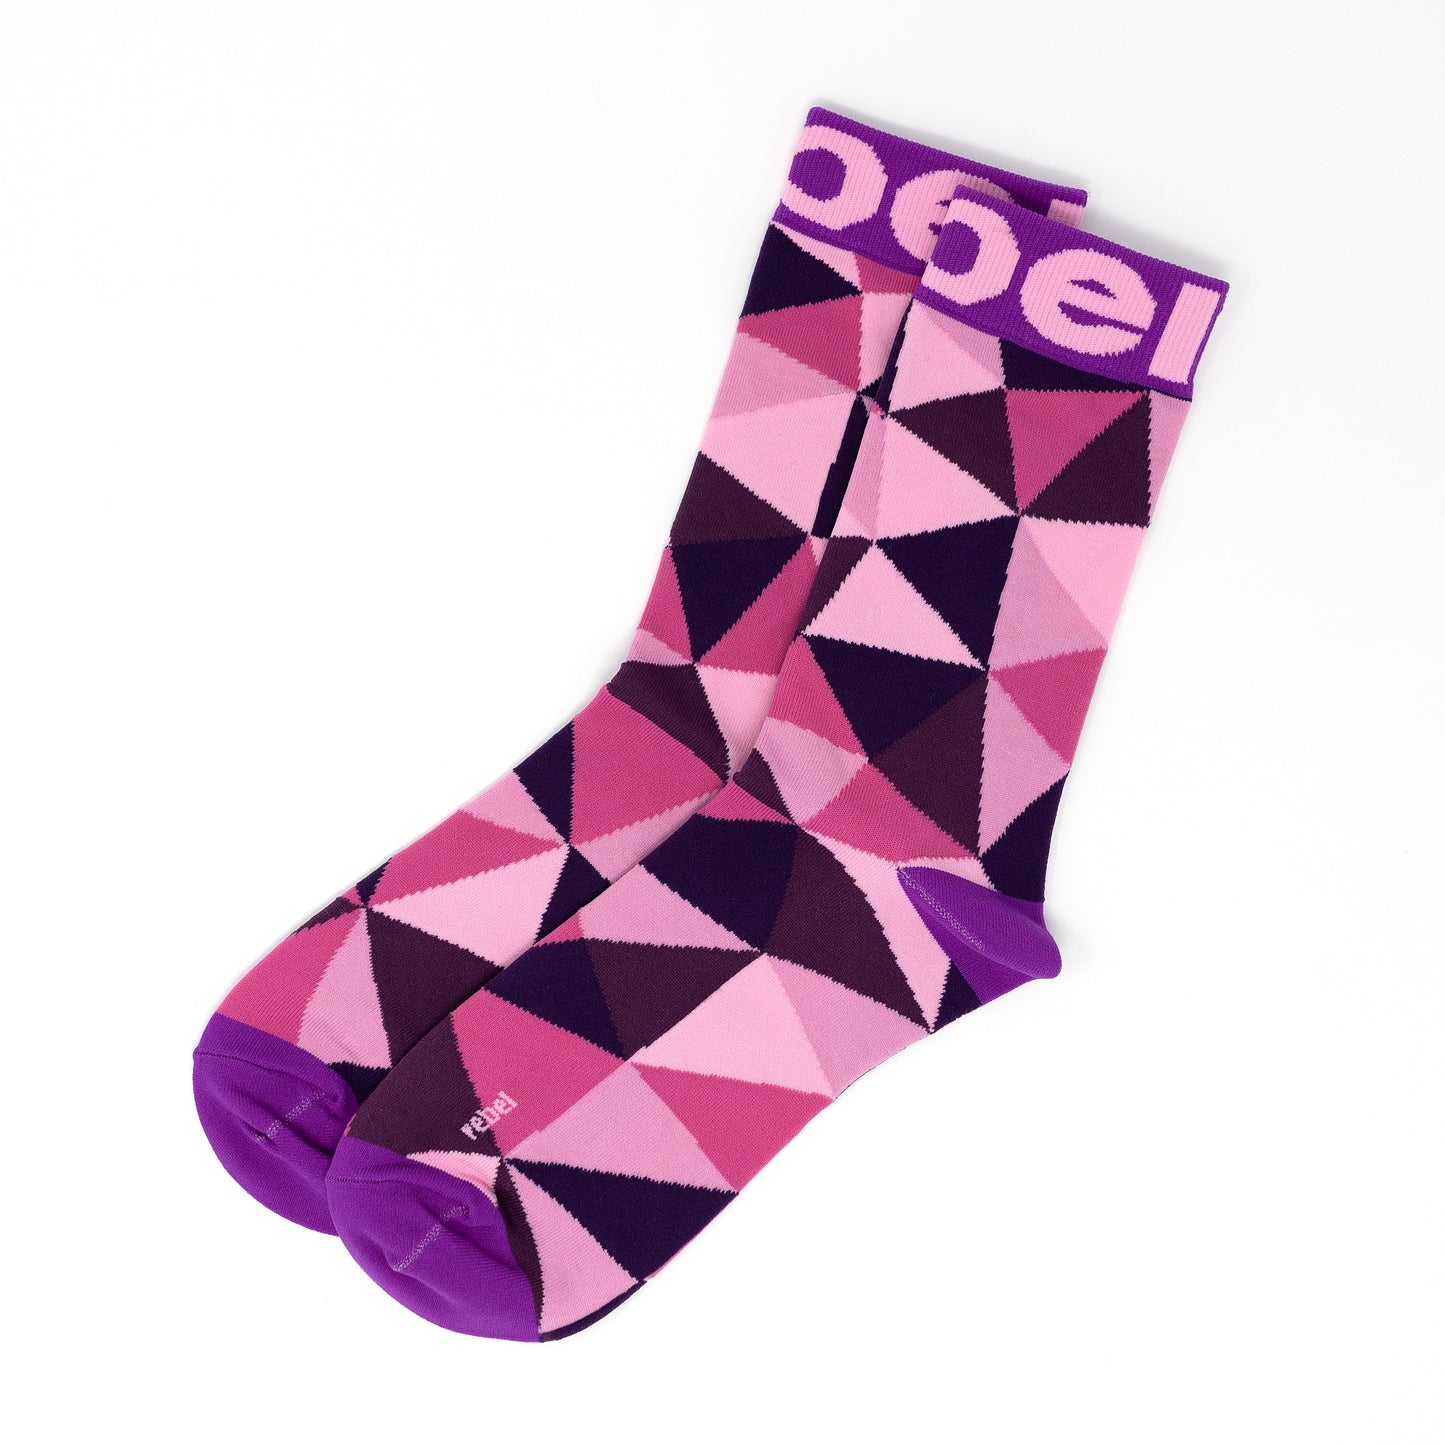 Elevate your dress game with Rebel Fashion's Dress Purple Socks!